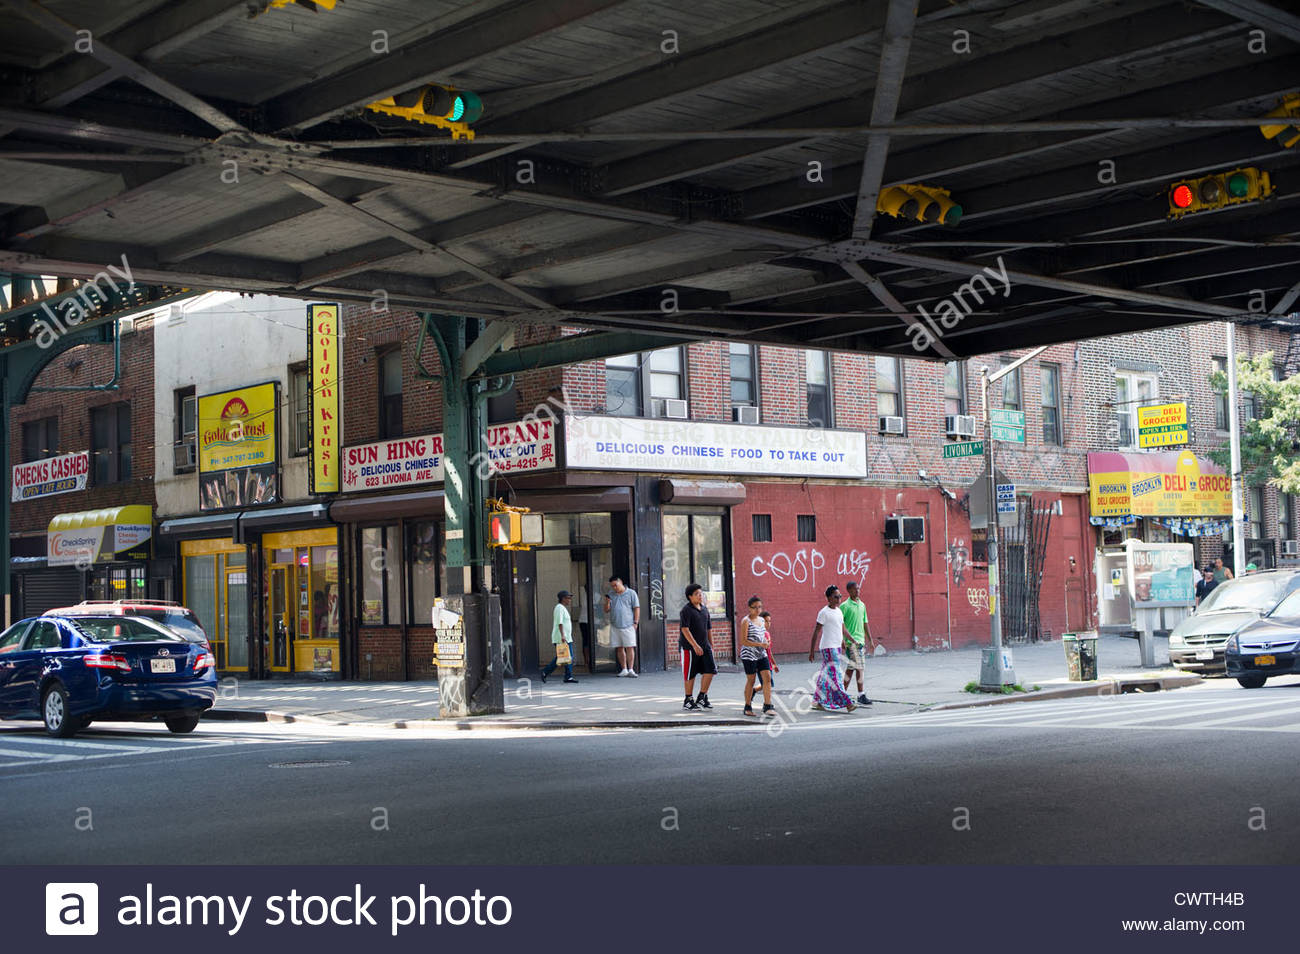 pedestrians-cross-the-street-under-the-elevated-subway-tracks-in-the-CWTH4B.jpg